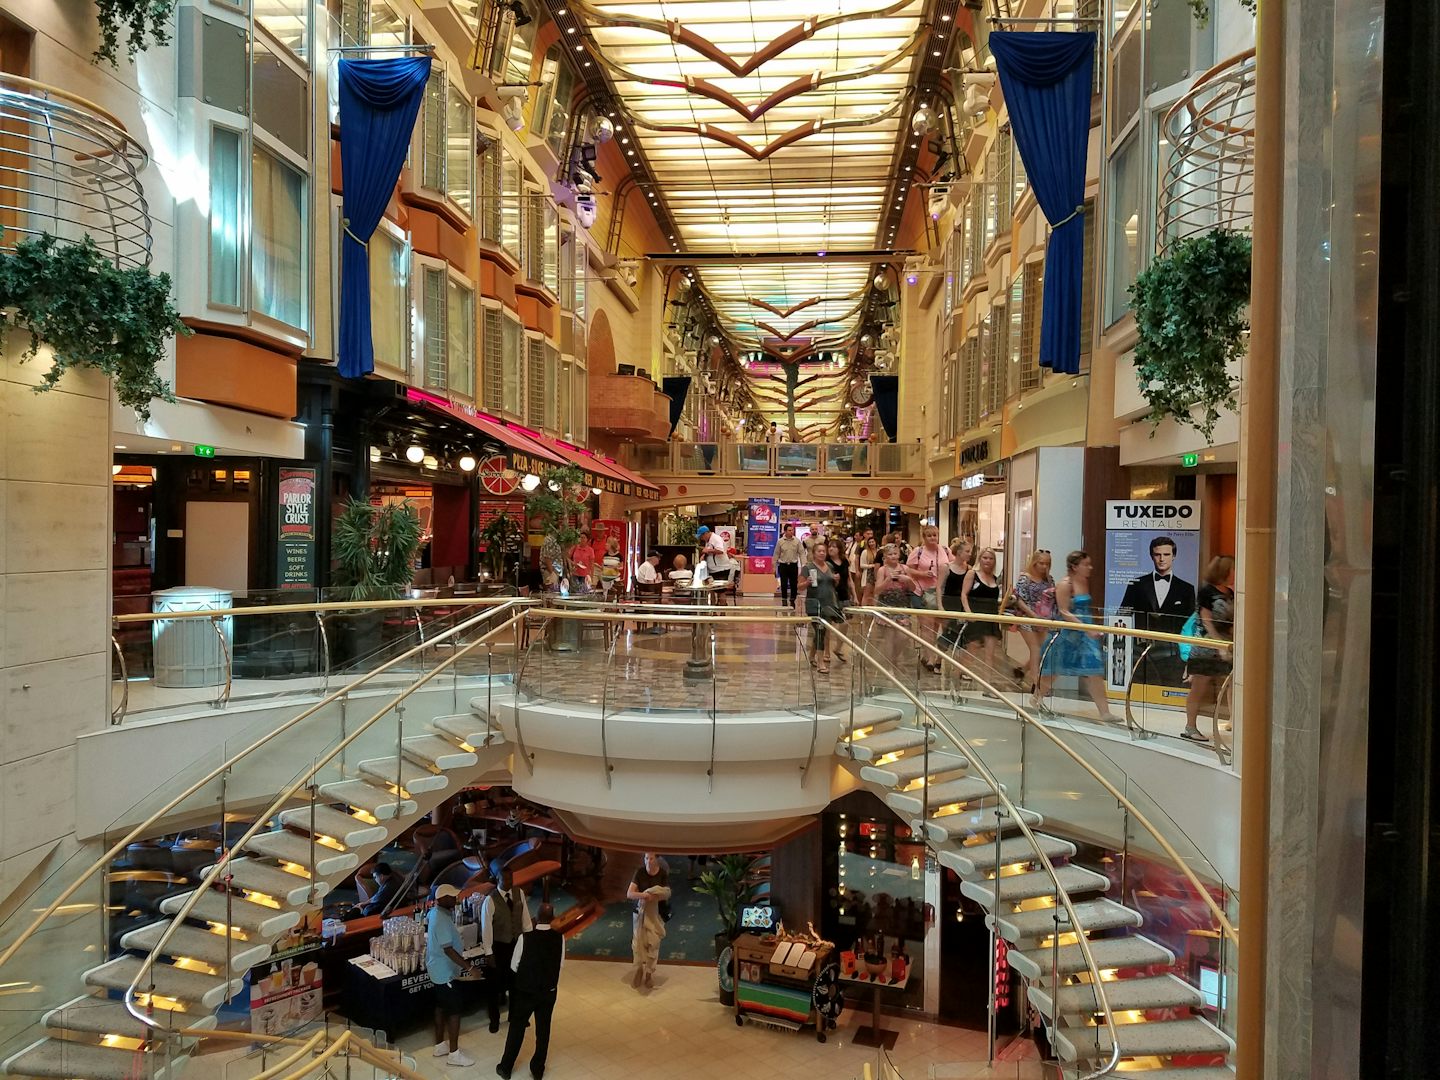 Royal Promenade looking from the bow